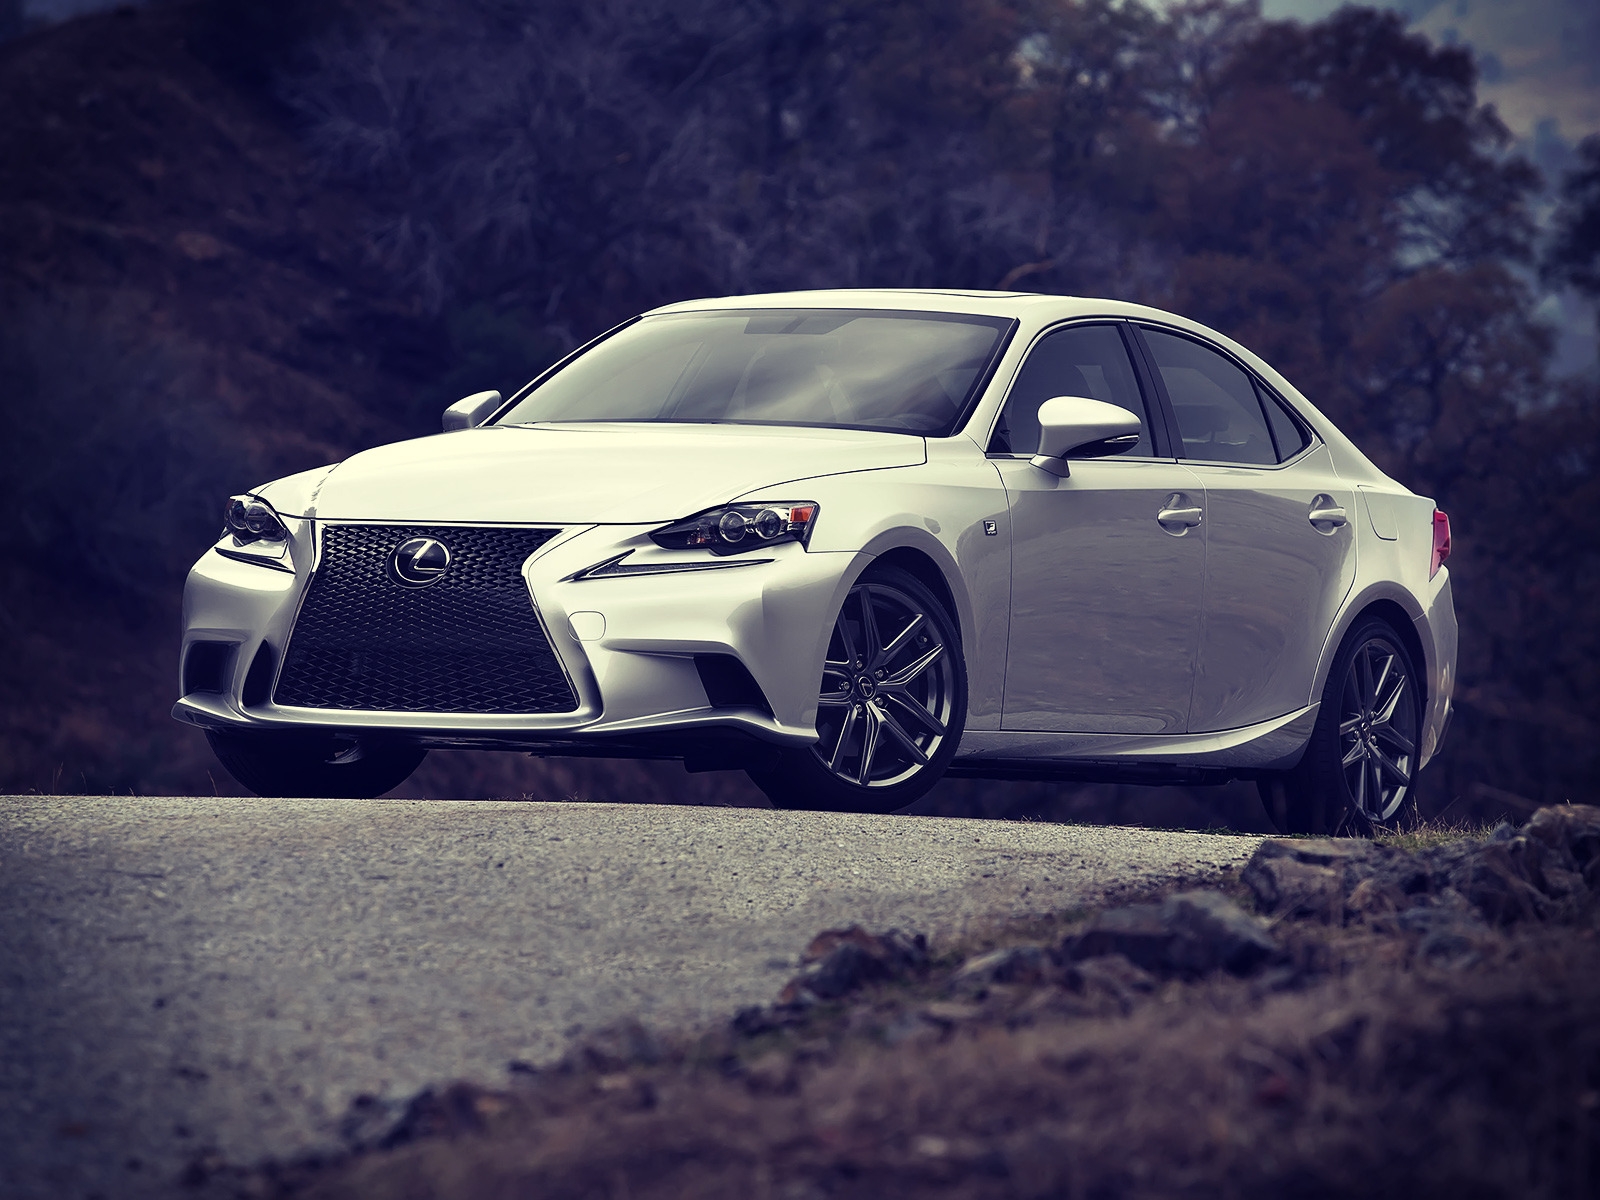 Lexus IS 2014 for 1600 x 1200 resolution